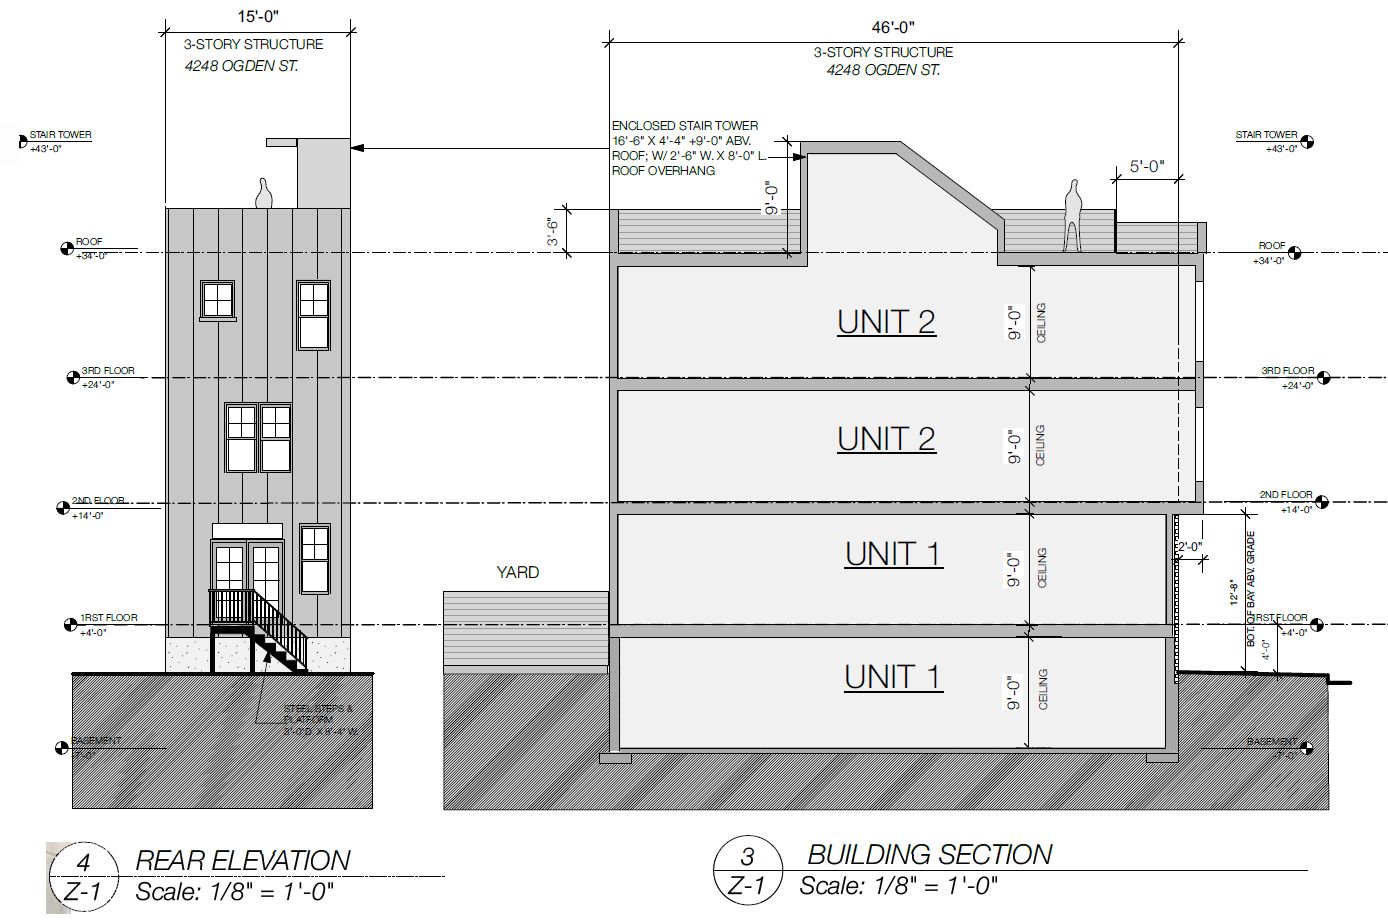 4248 Ogden Street. Building elevation and building section. Credit: JOs. Serratore Co. Architect Inc. via the City of Philadelphia Department of Planning and Development